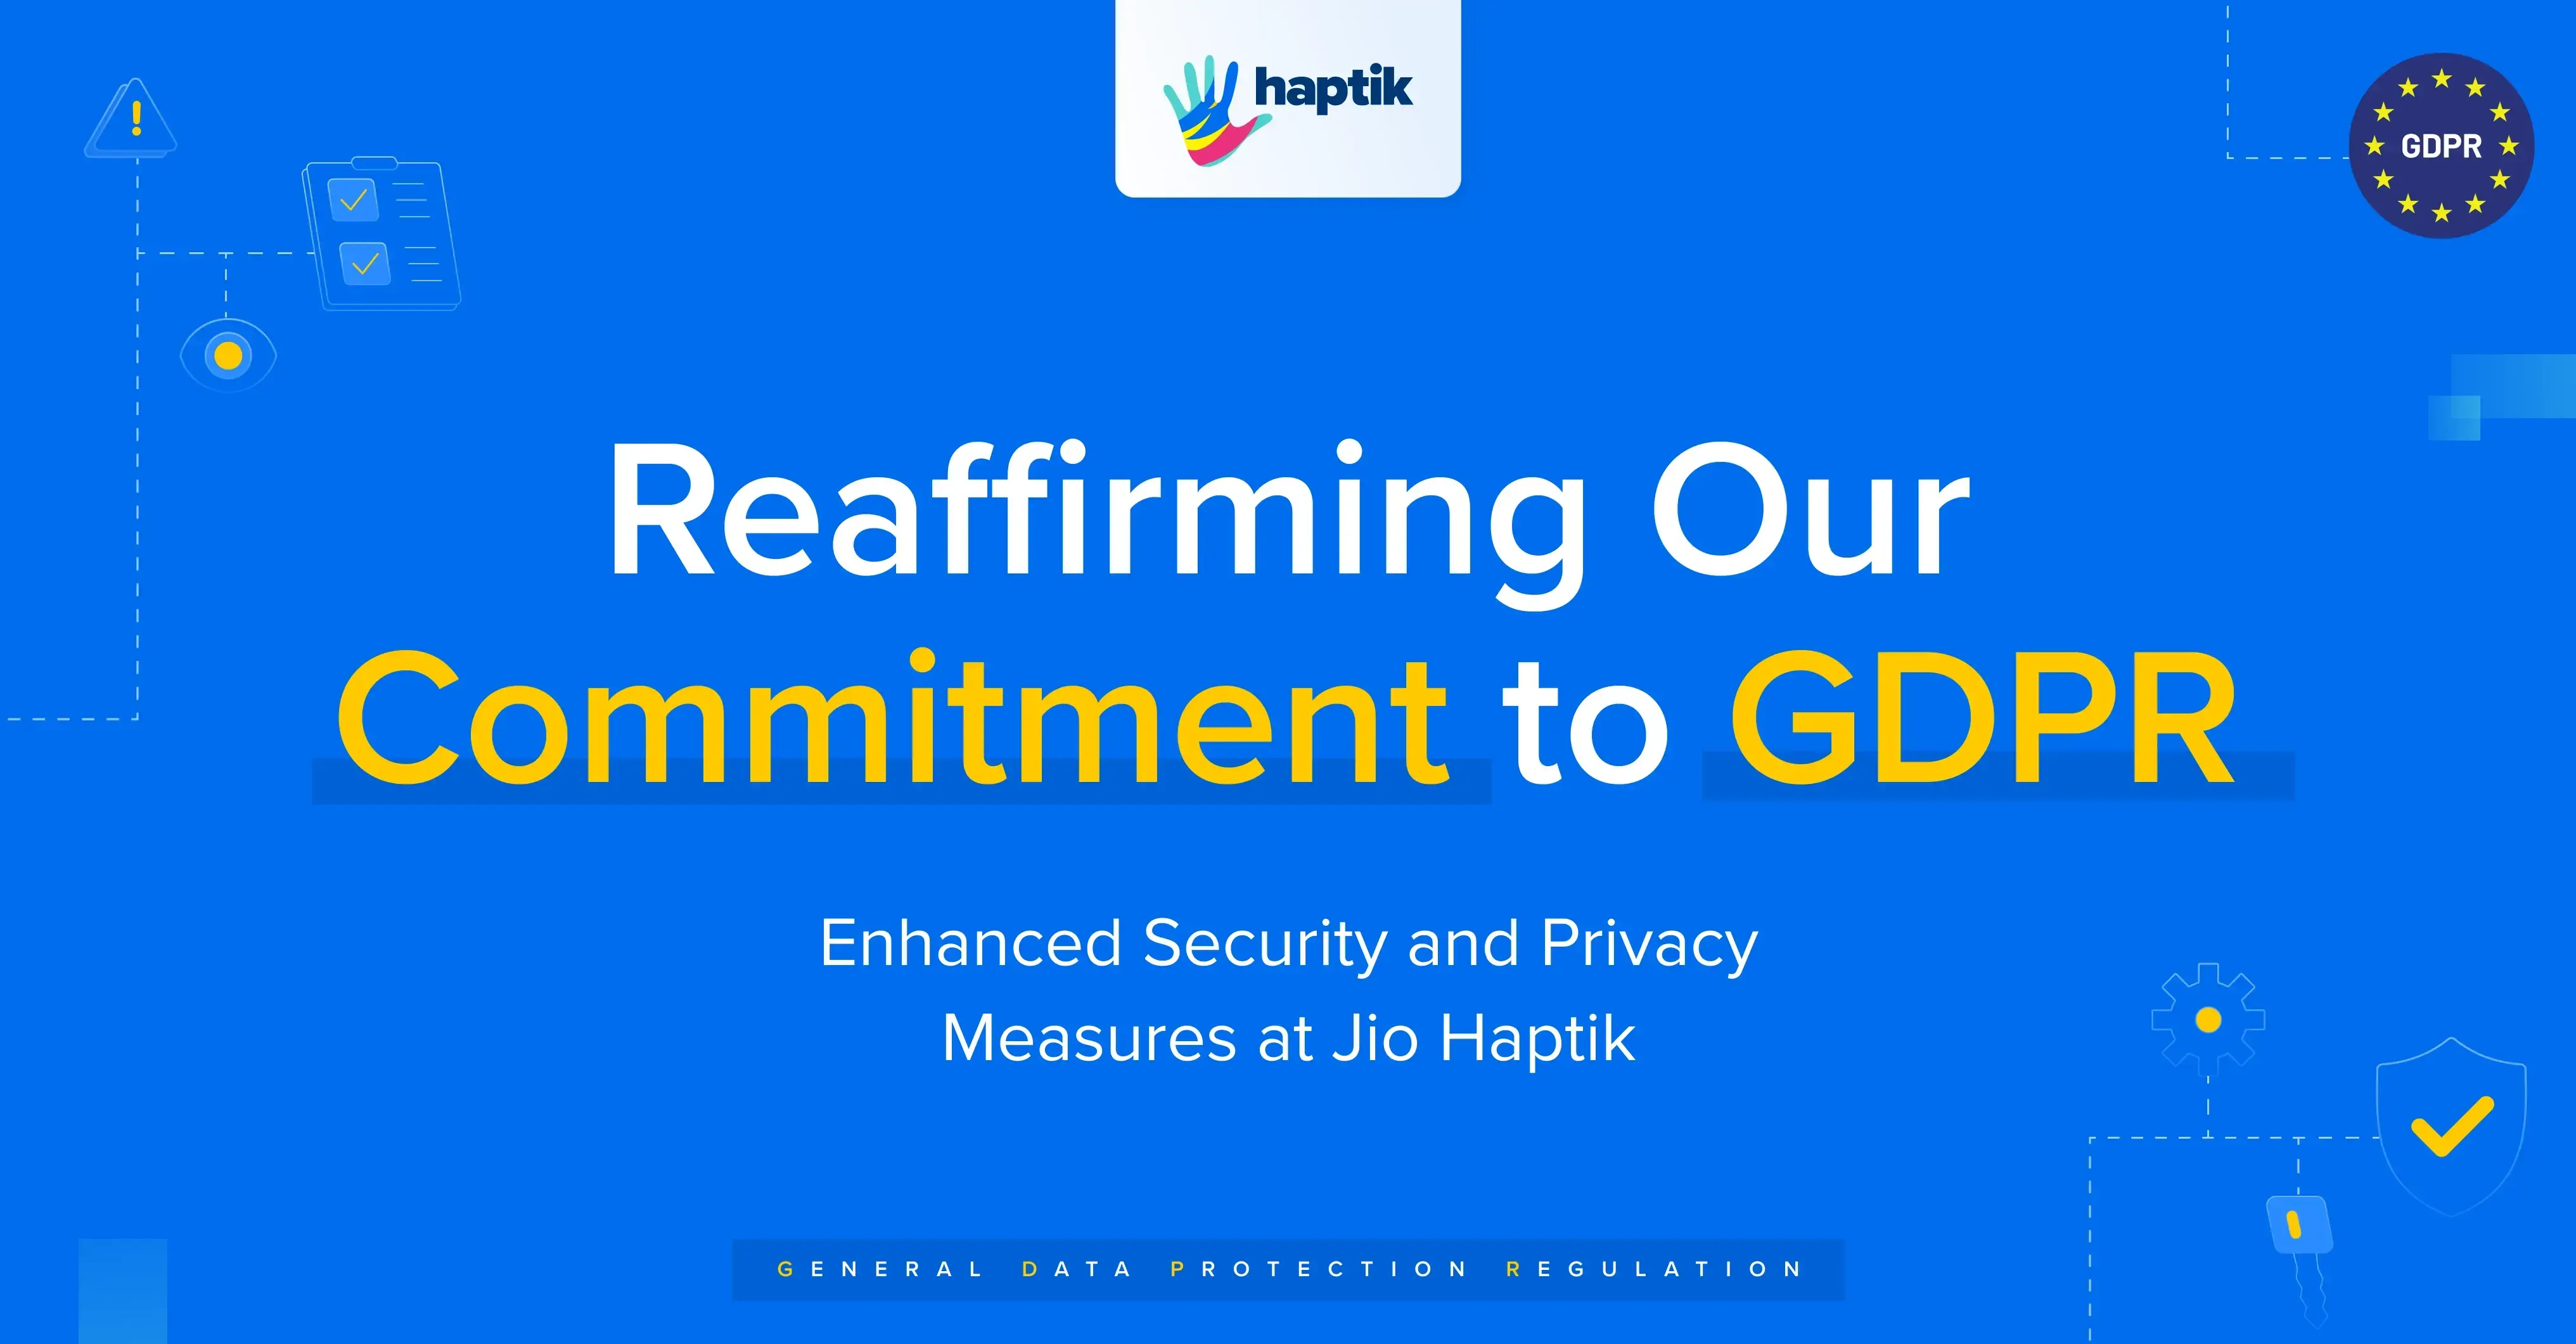 Reaffirming Our Commitment to GDPR: Enhanced Security and Privacy Measures at Jio Haptik